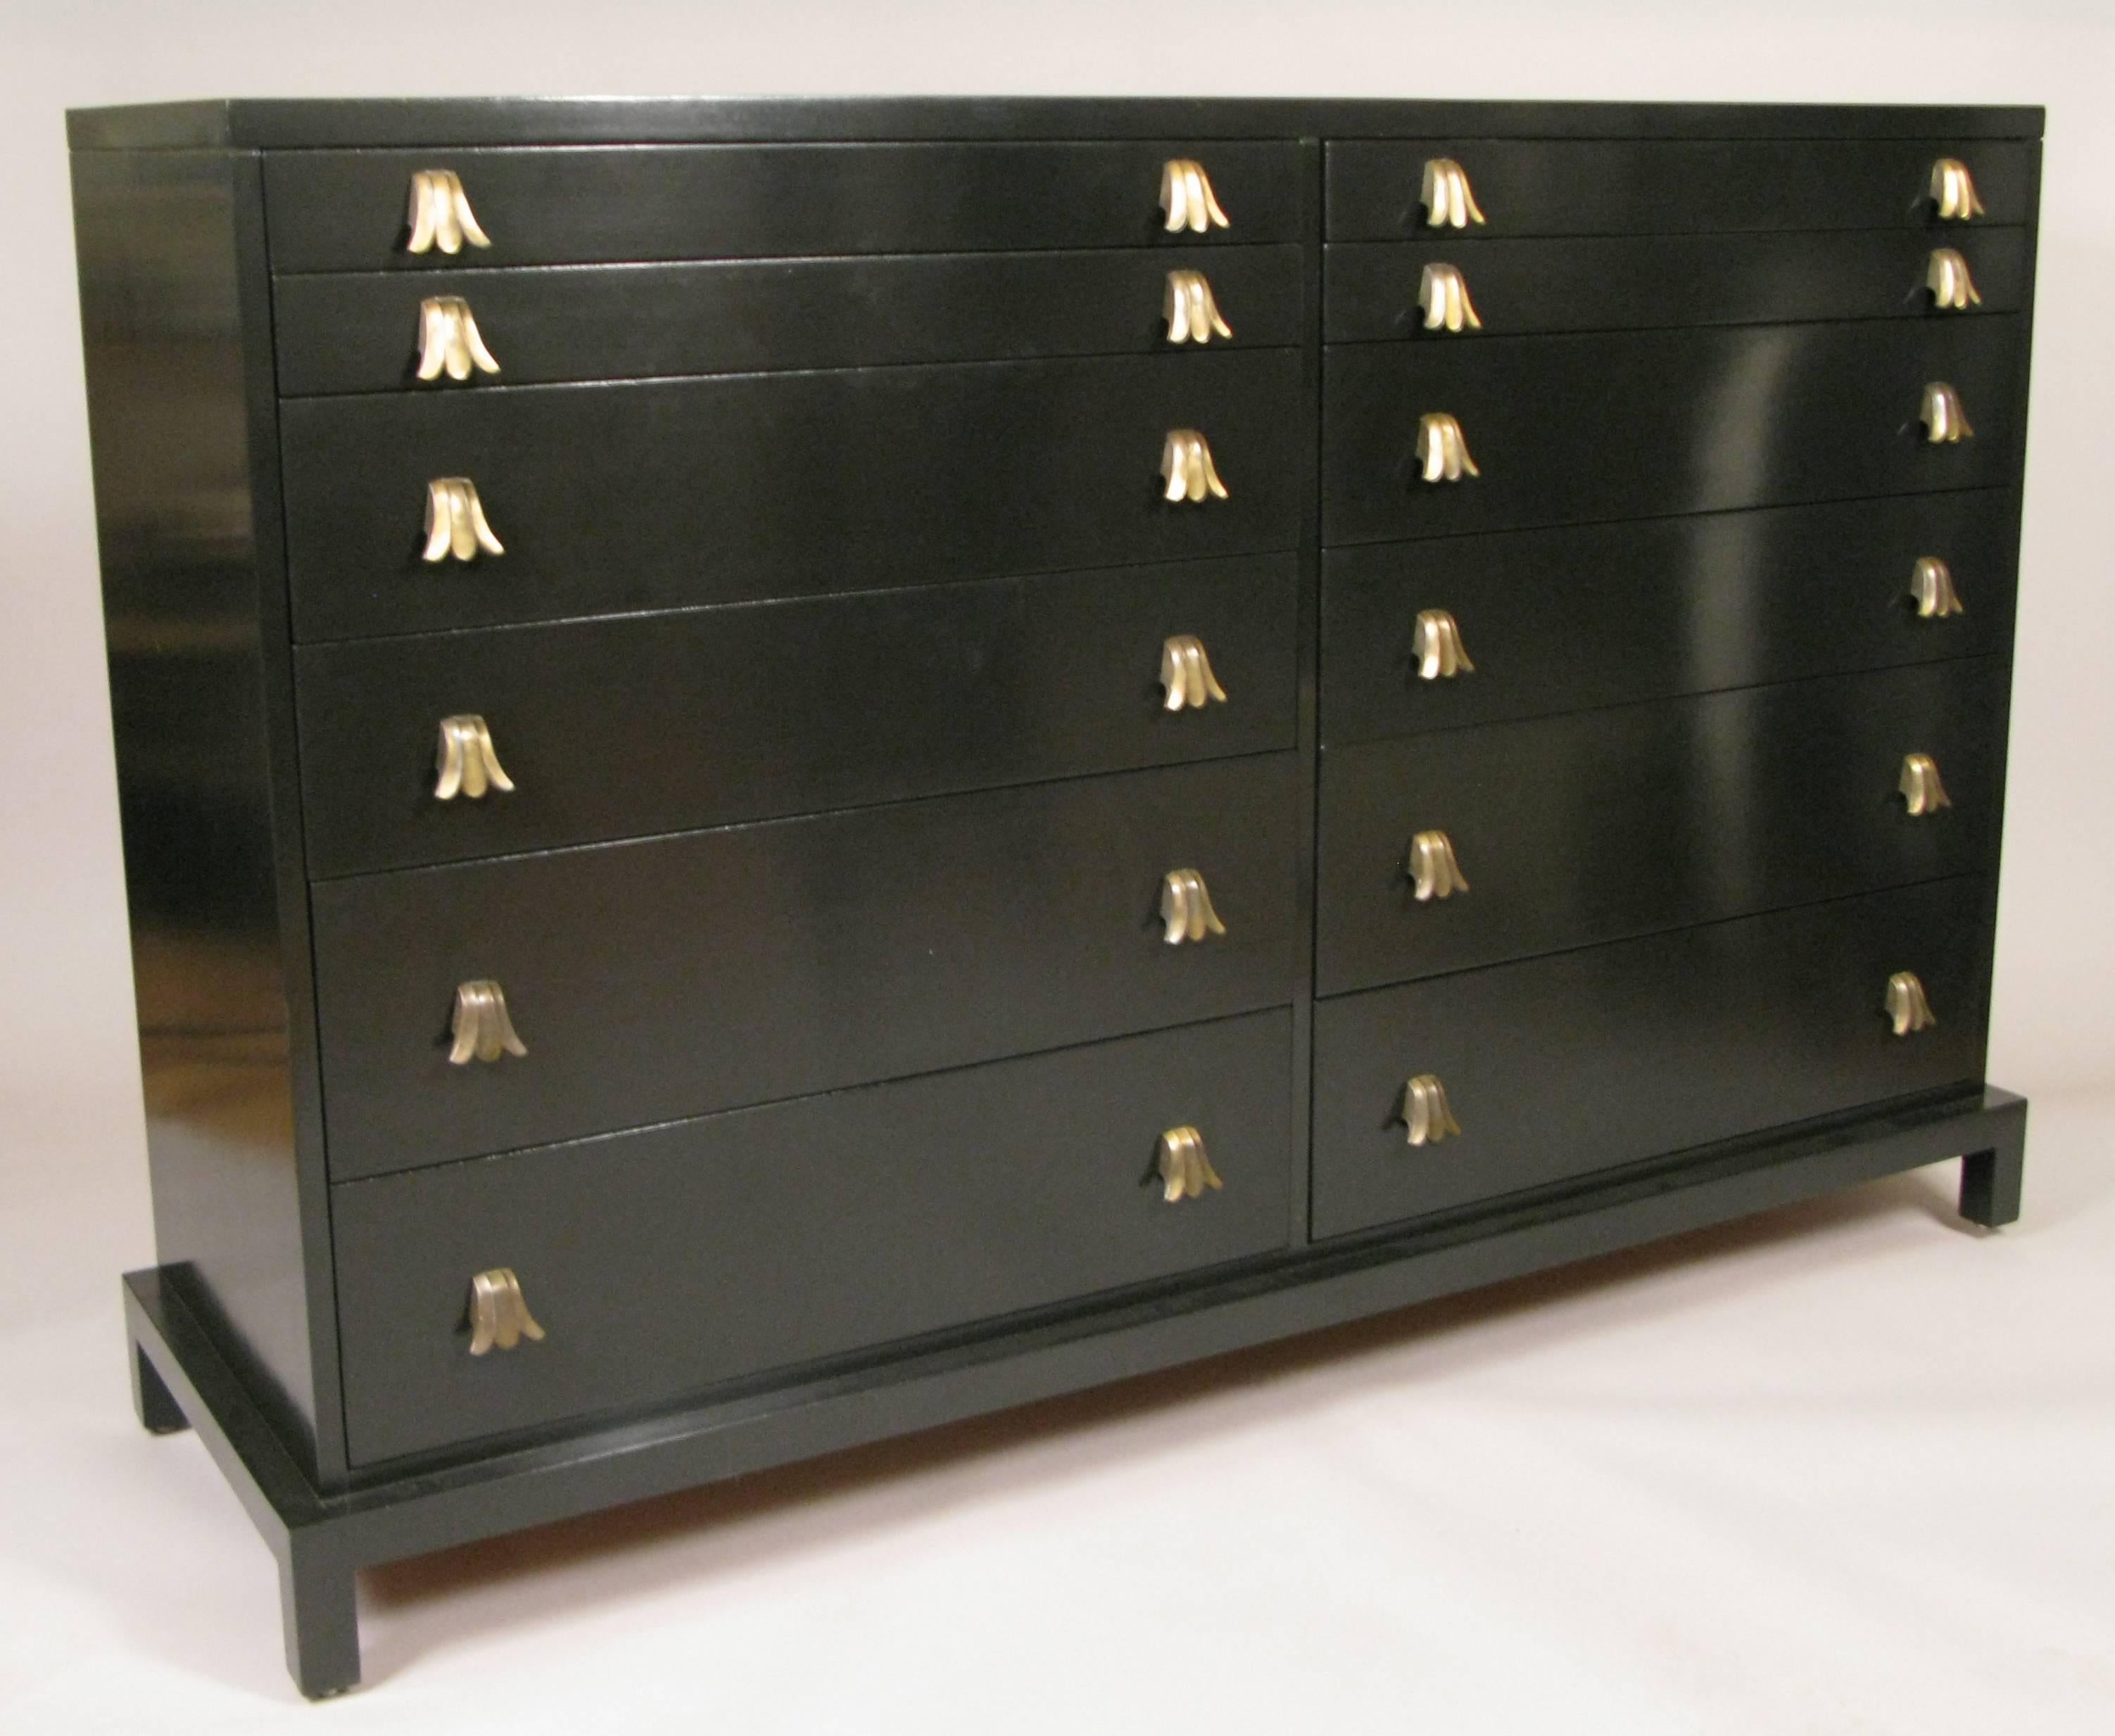 A stunning rare vintage 1950s 12-drawer double chest by Widdicomb. Beautiful design and cabinetwork, with two rows of graduated drawers, several divided and flared drawer pulls in original finish. The case has a gorgeous ebonized finish.